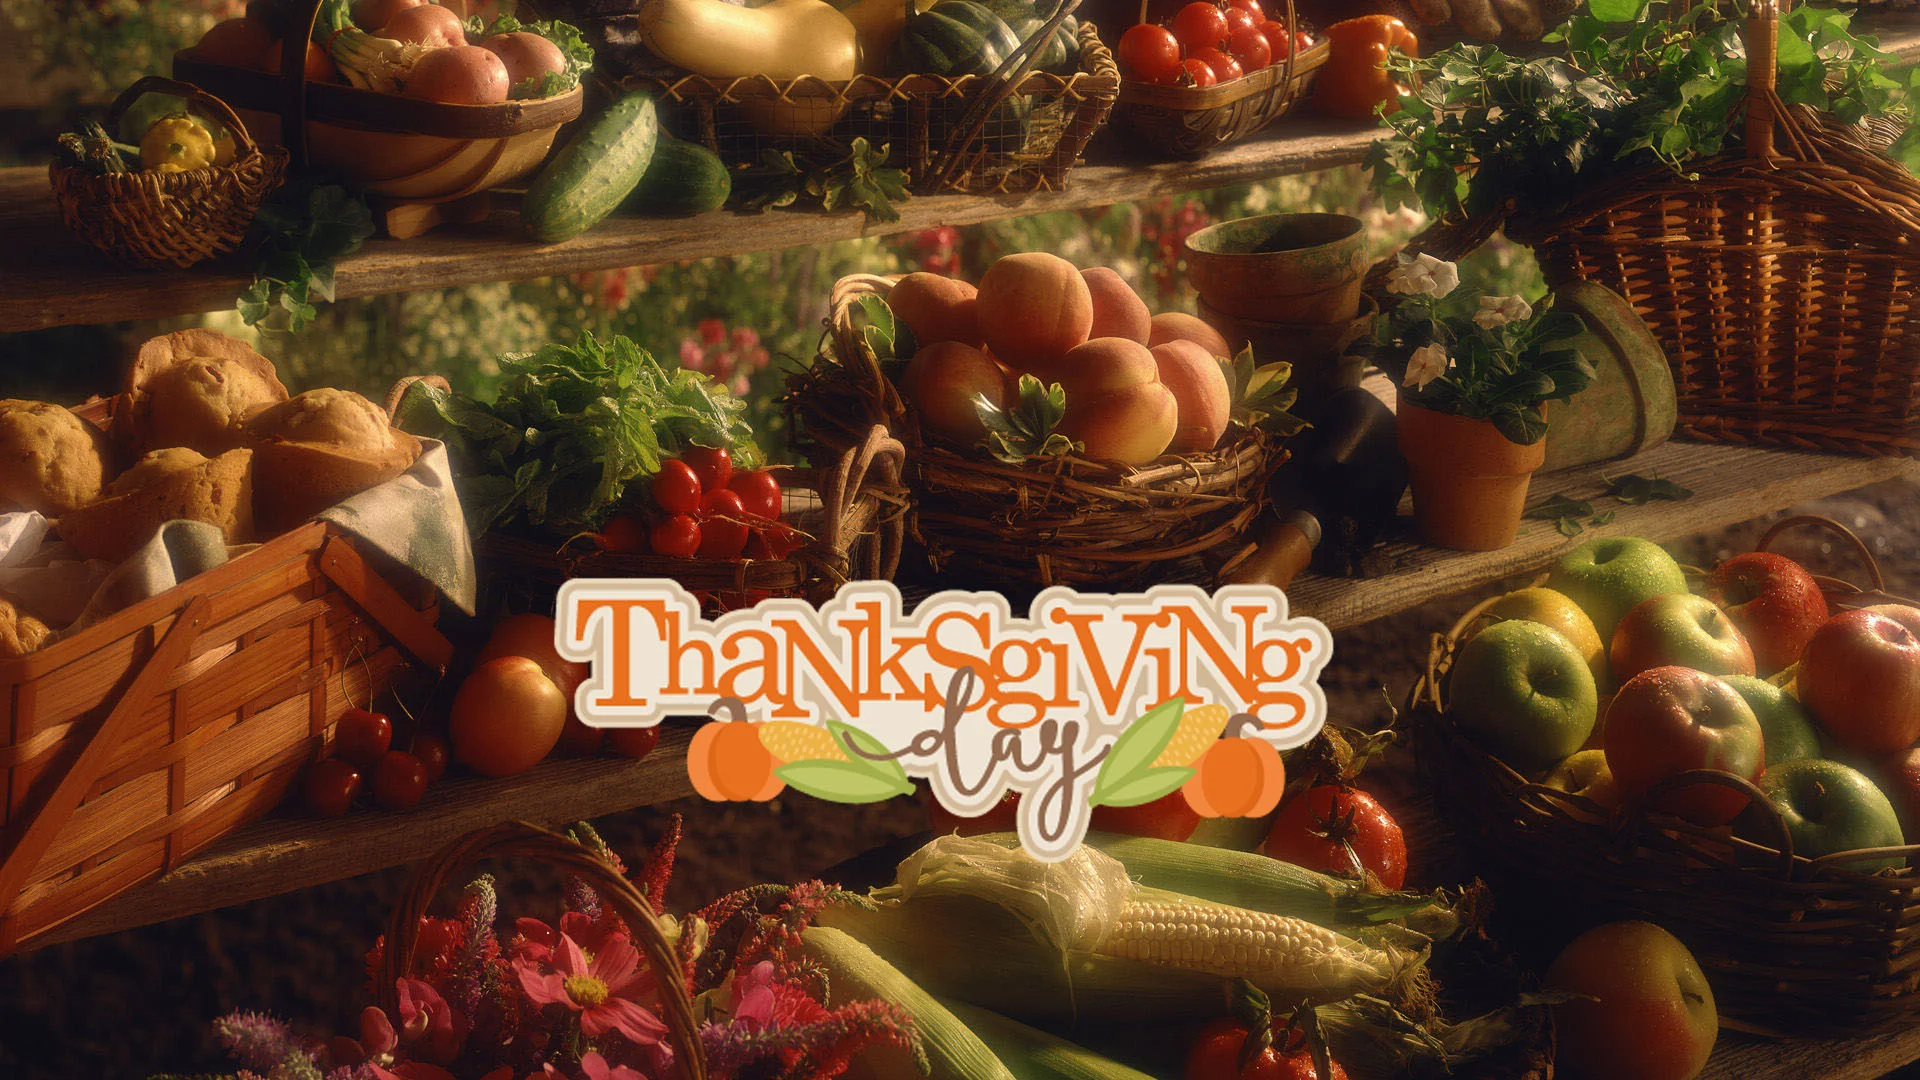 Happy thanksgiving day wishes cool best background hd wallpaper